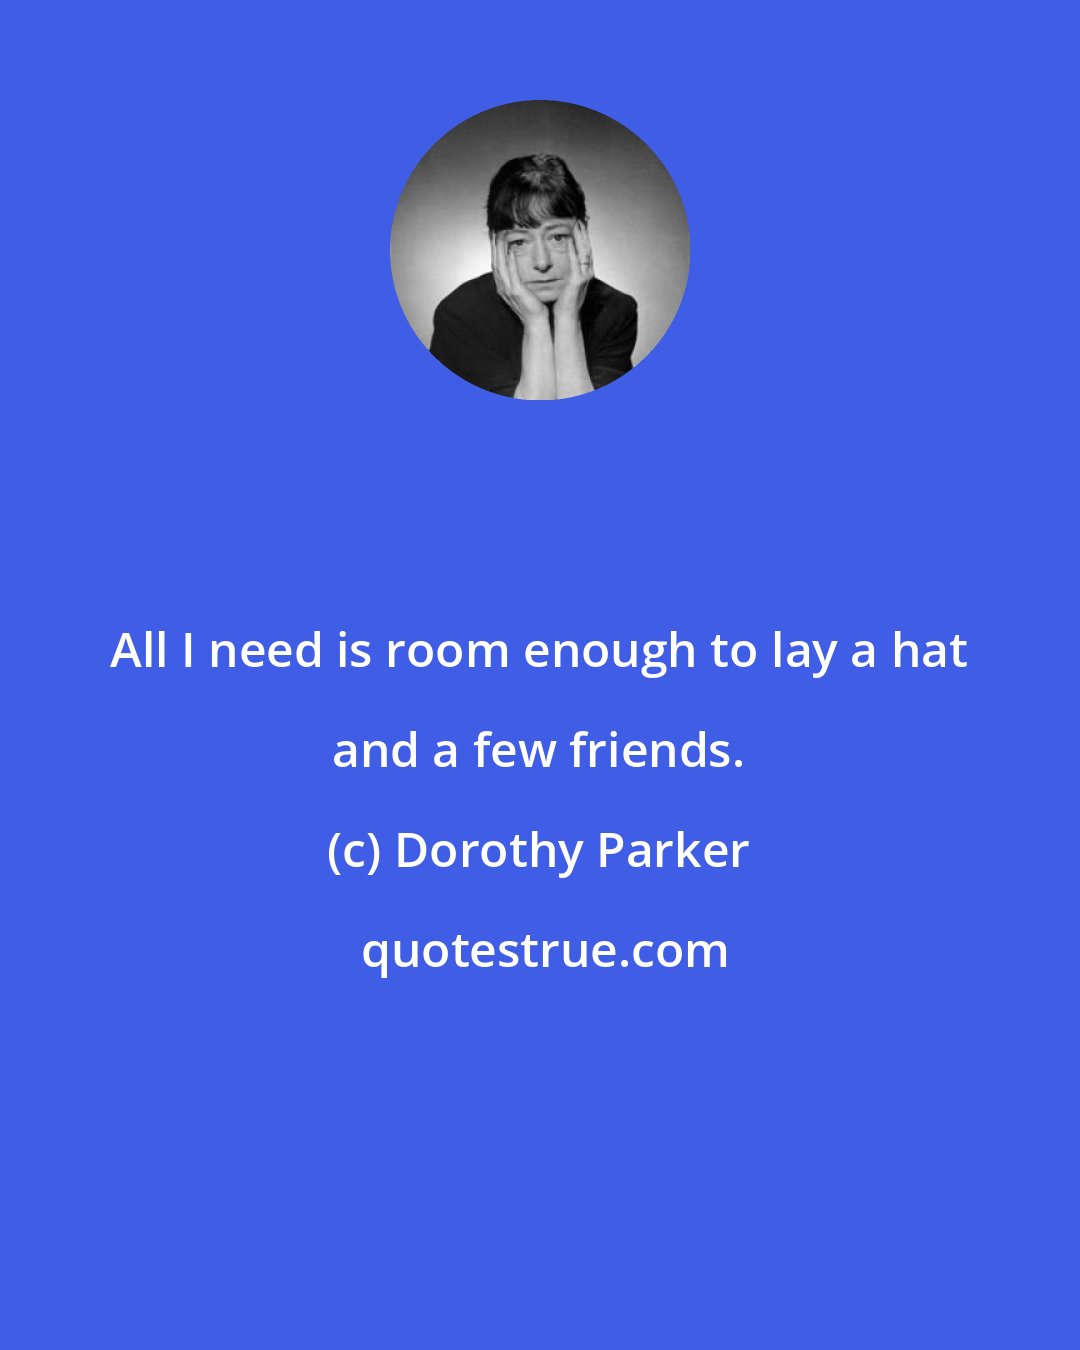 Dorothy Parker: All I need is room enough to lay a hat and a few friends.